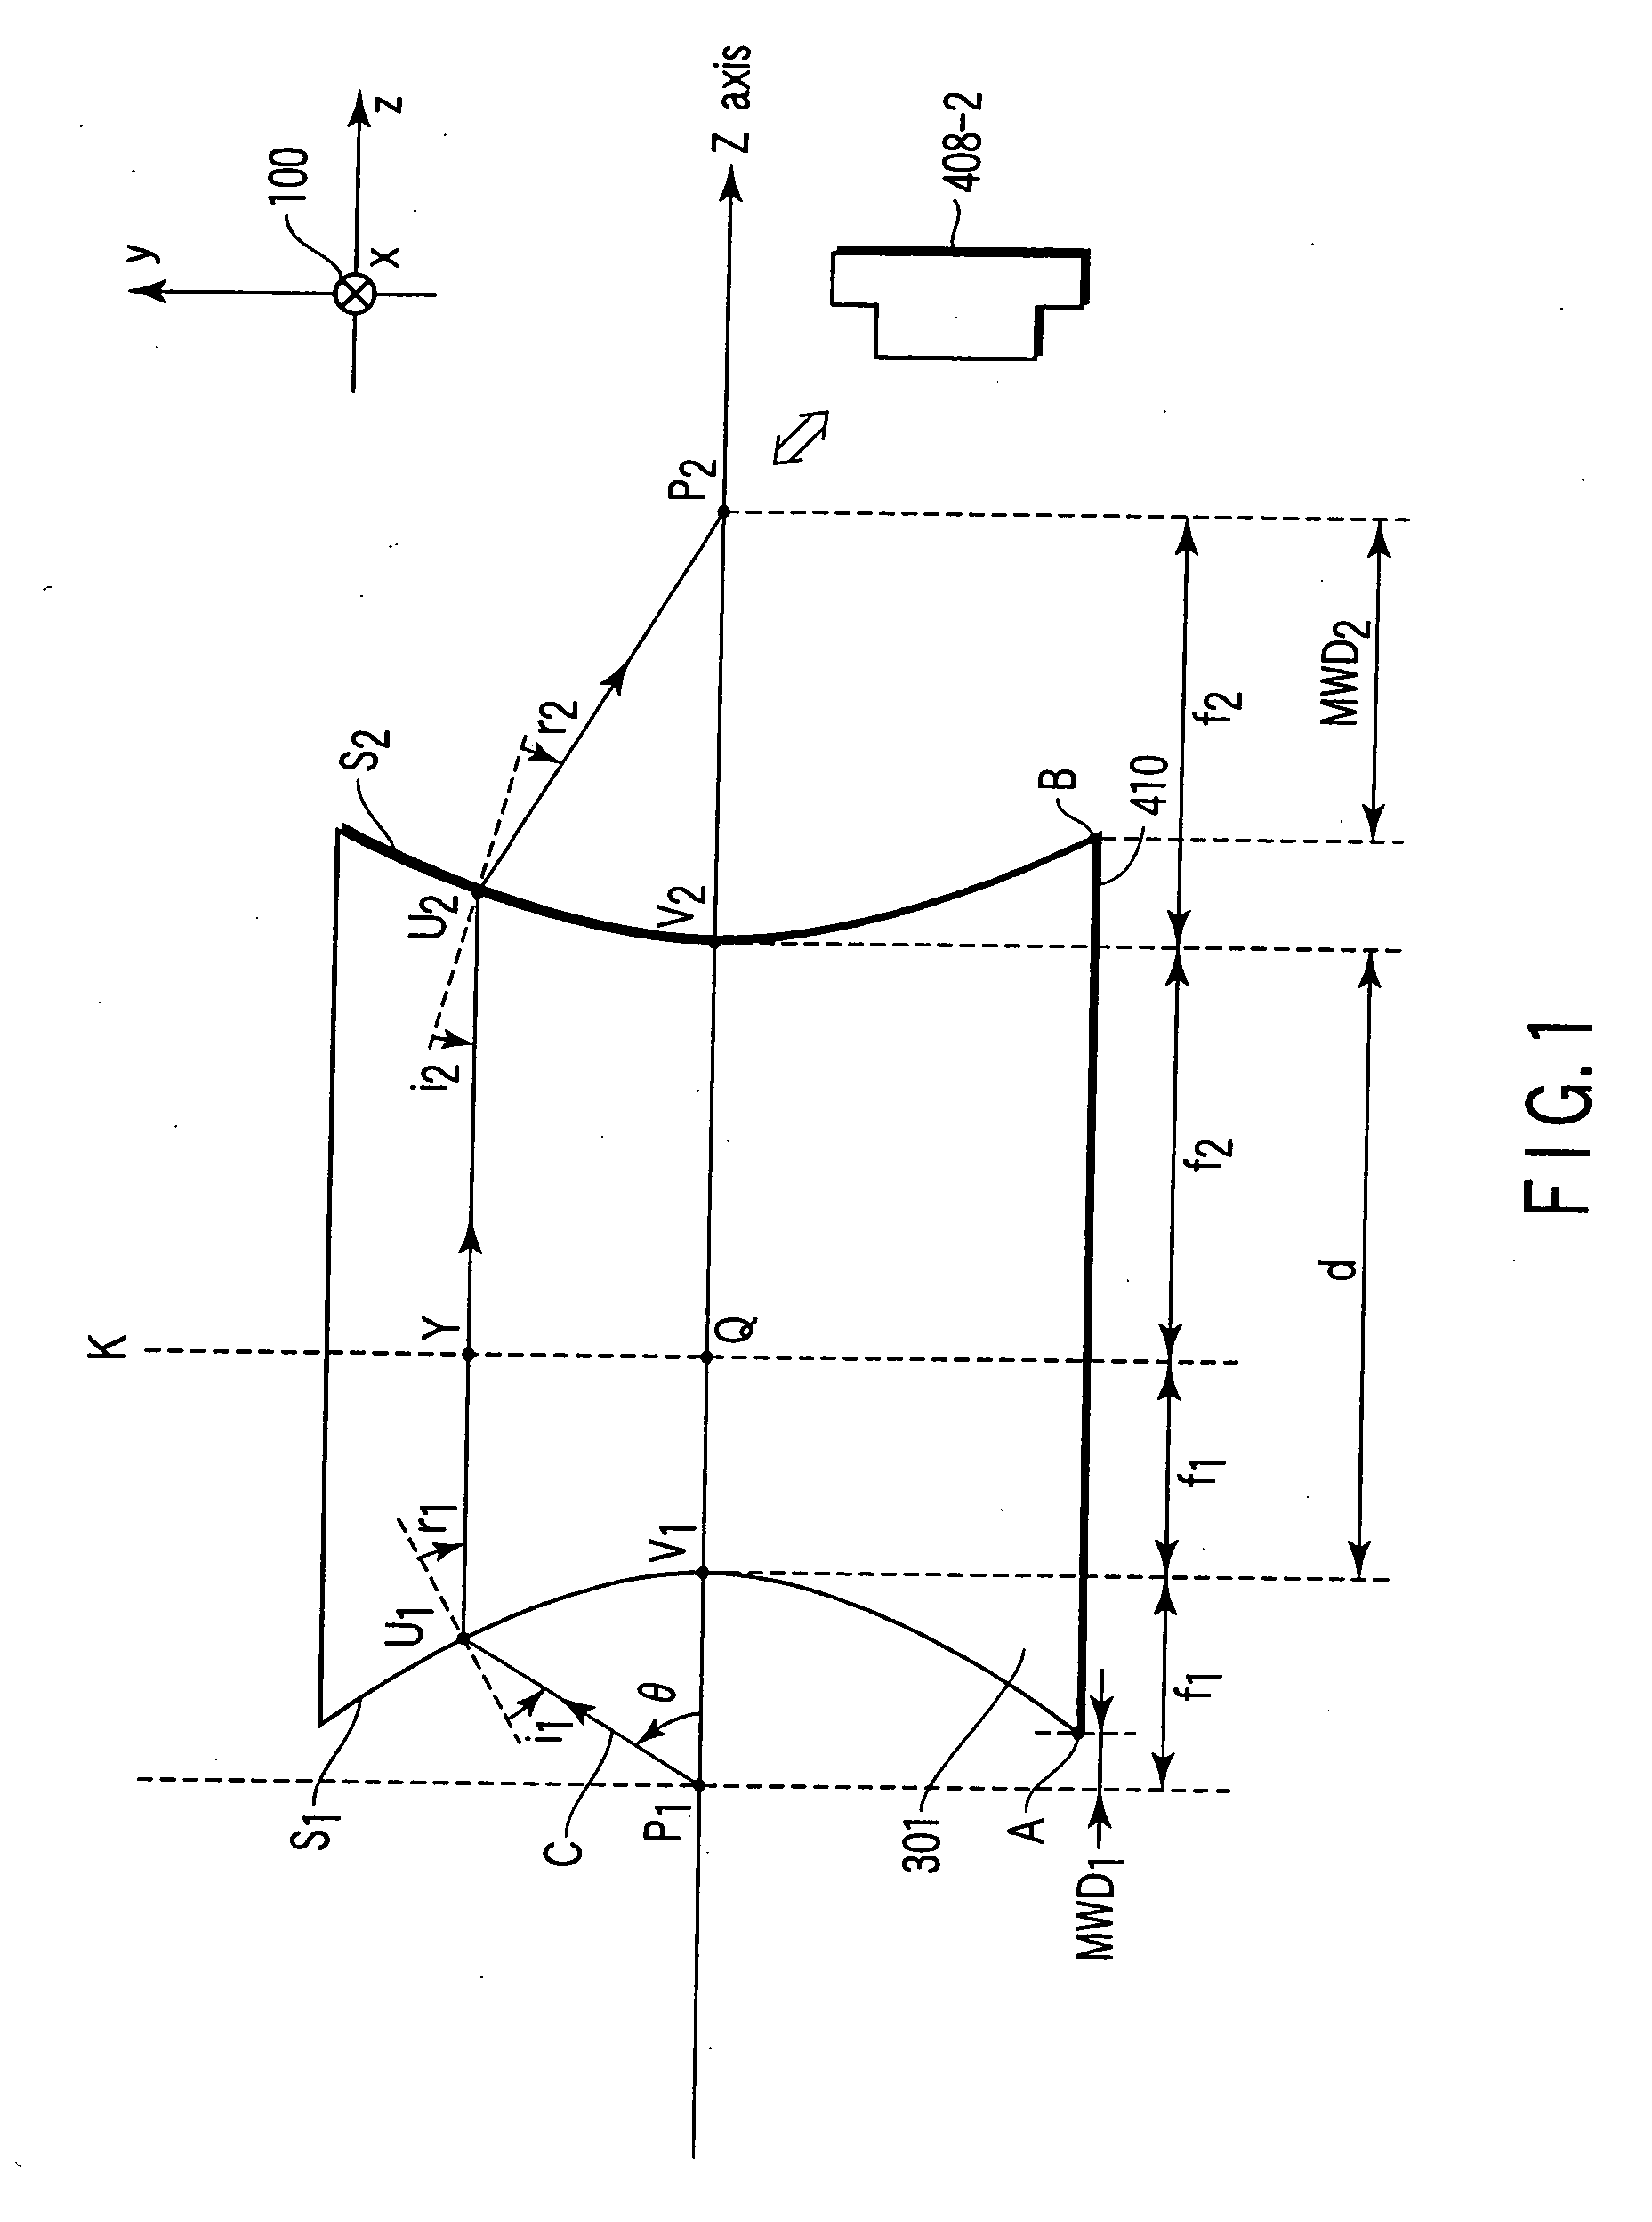 Lens and optical system